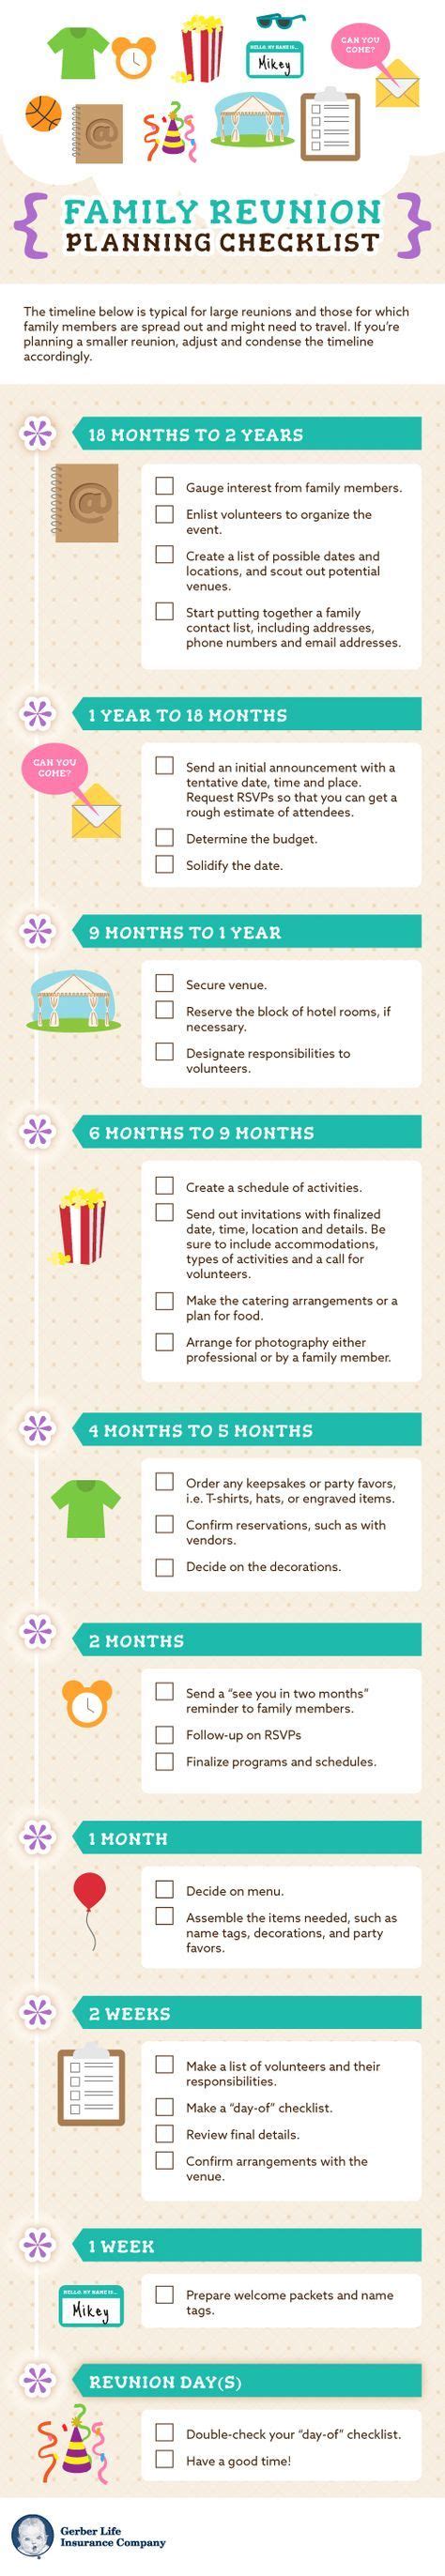 family reunion planning checklist family reunion planning family